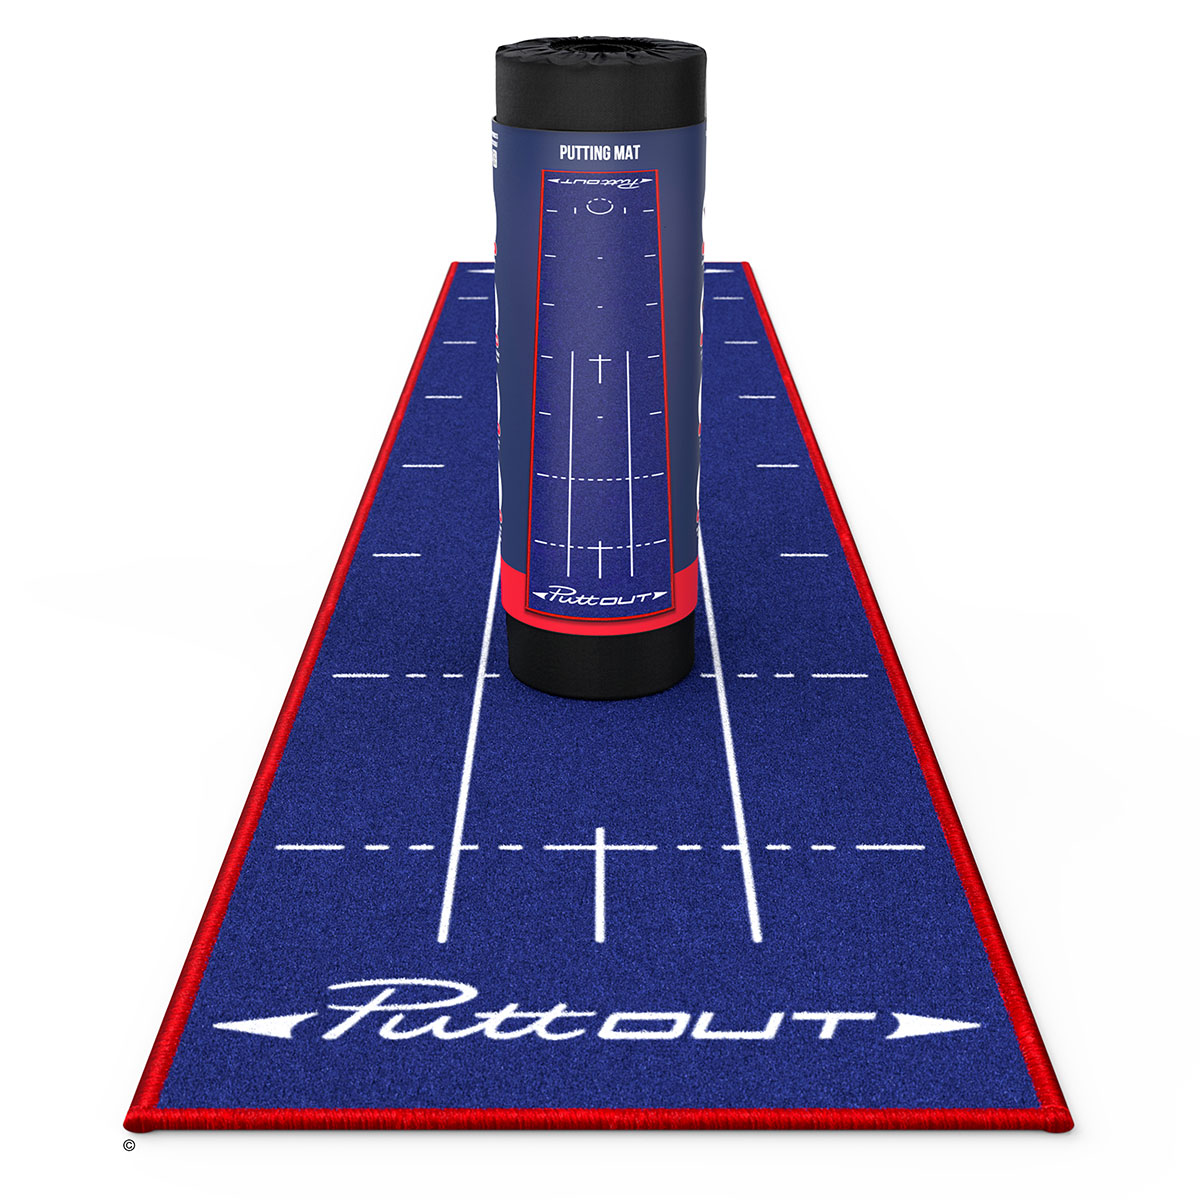 PuttOUT Deluxe Golf Putting Mat